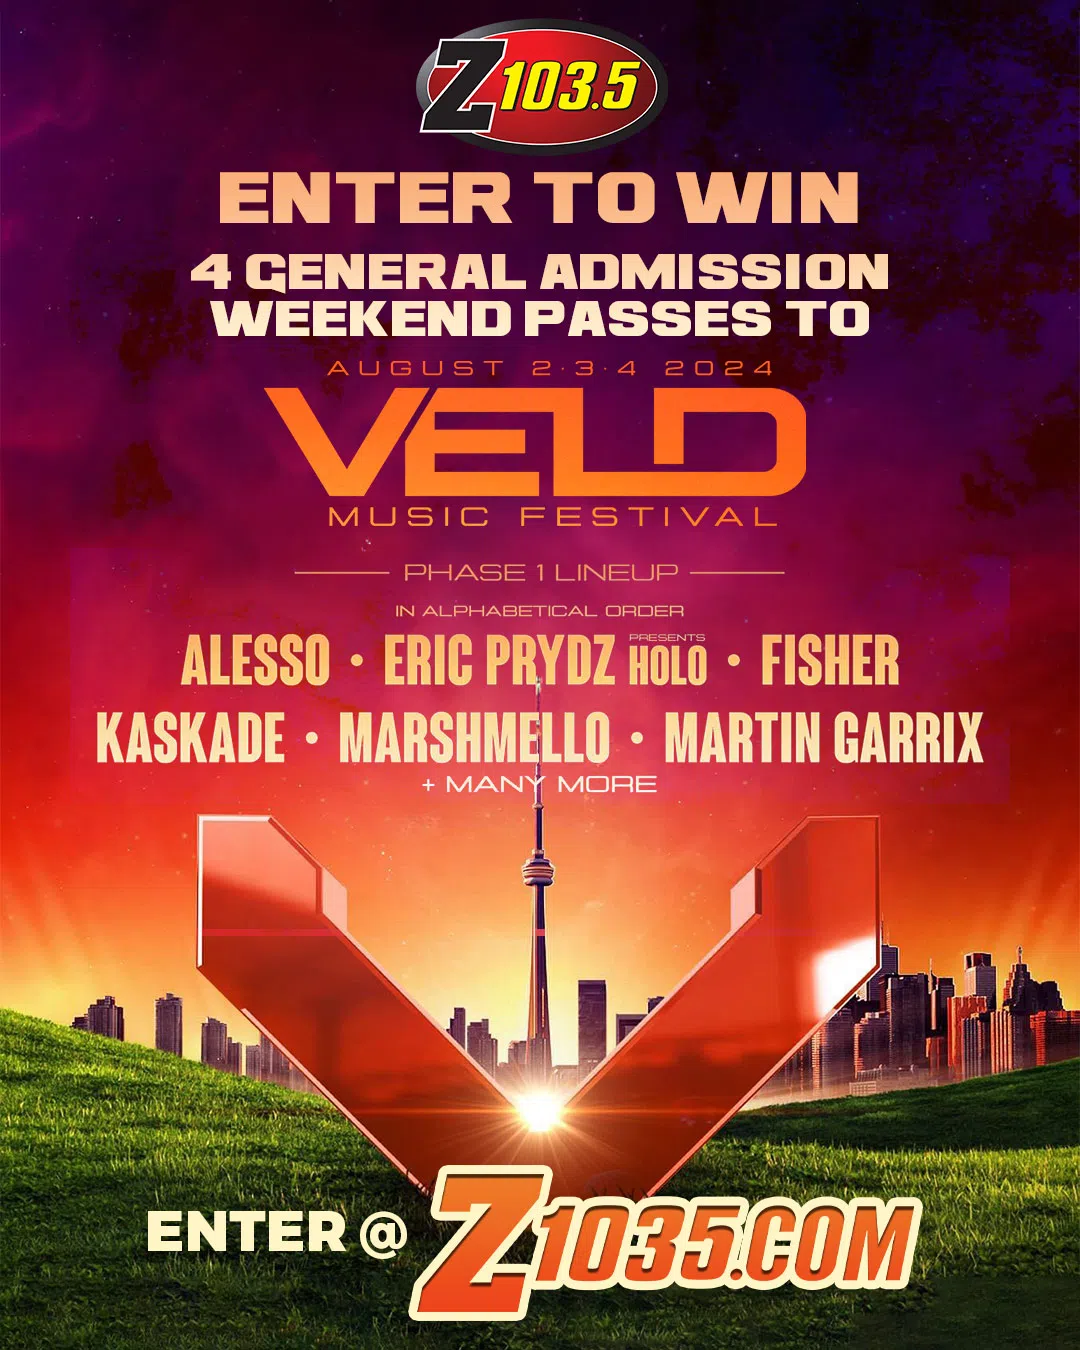 Feature: https://z1035.com/win/win-a-pair-of-passes-to-veld/